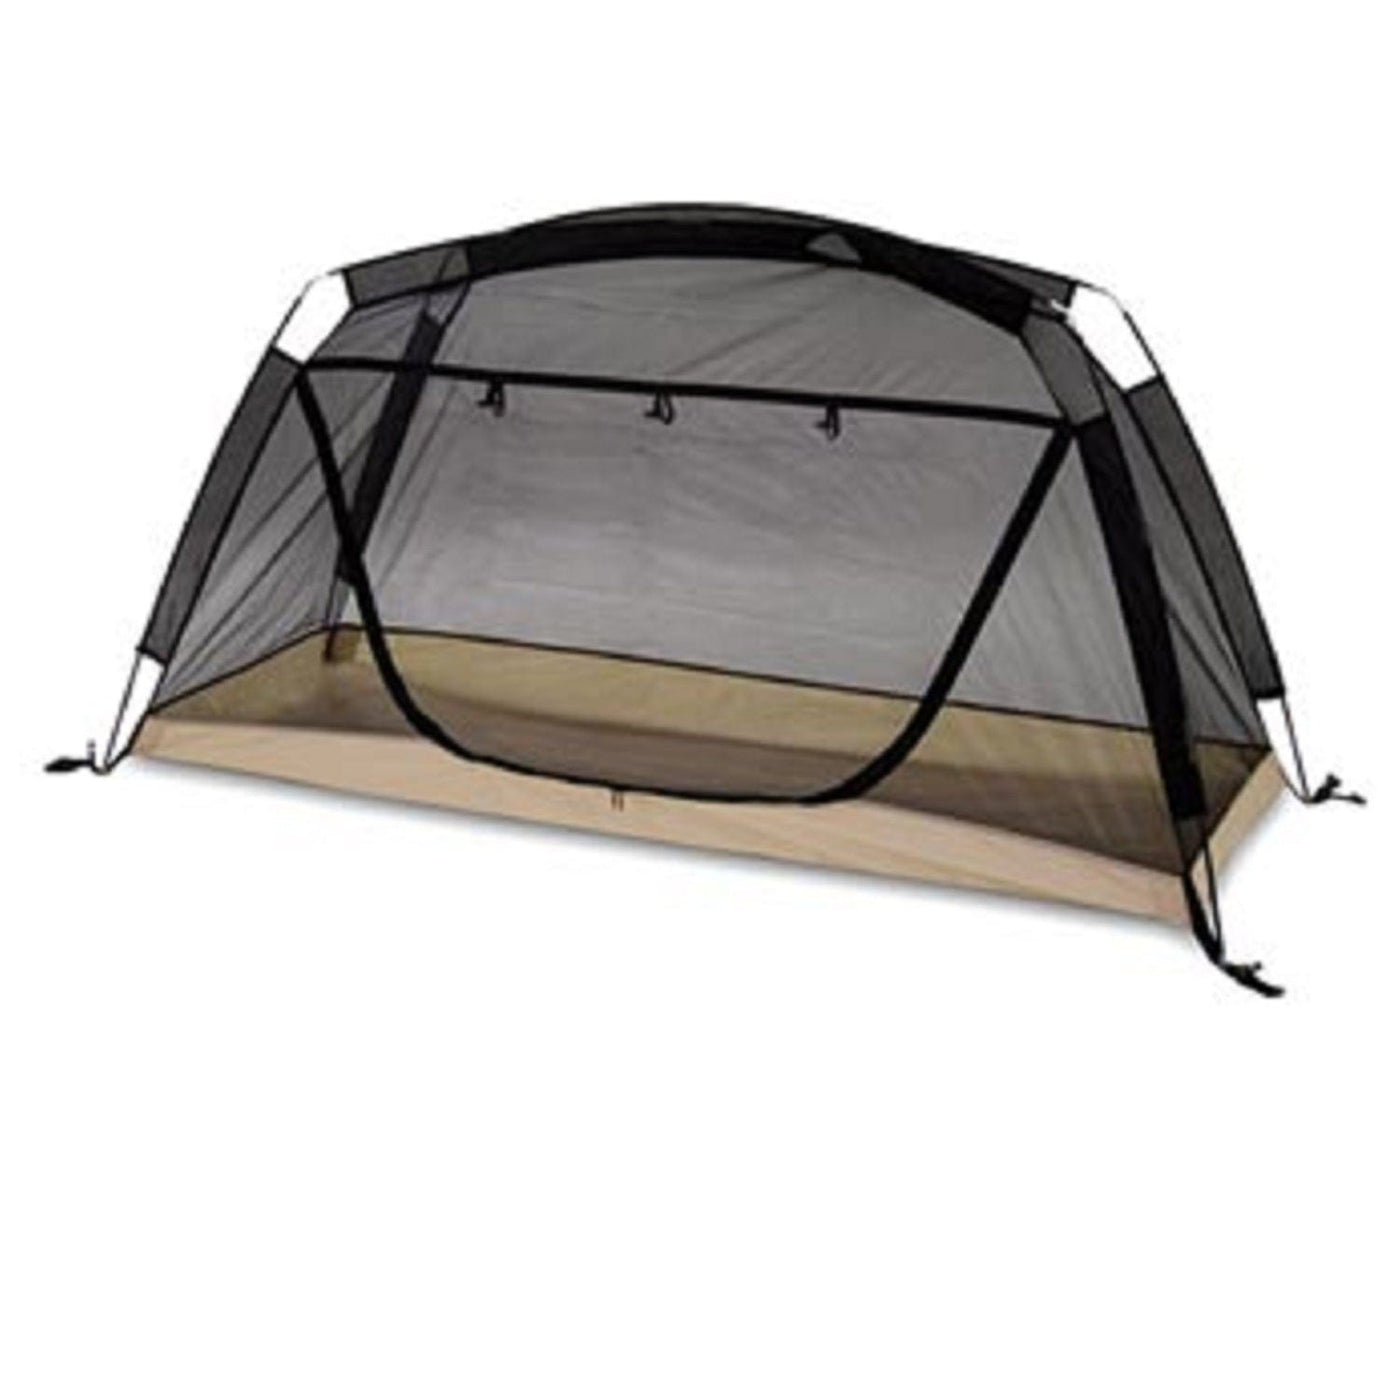 Kamp-Rite Kamp-Rite Insect Protection System with Rain Fly Tent Camping And Outdoor